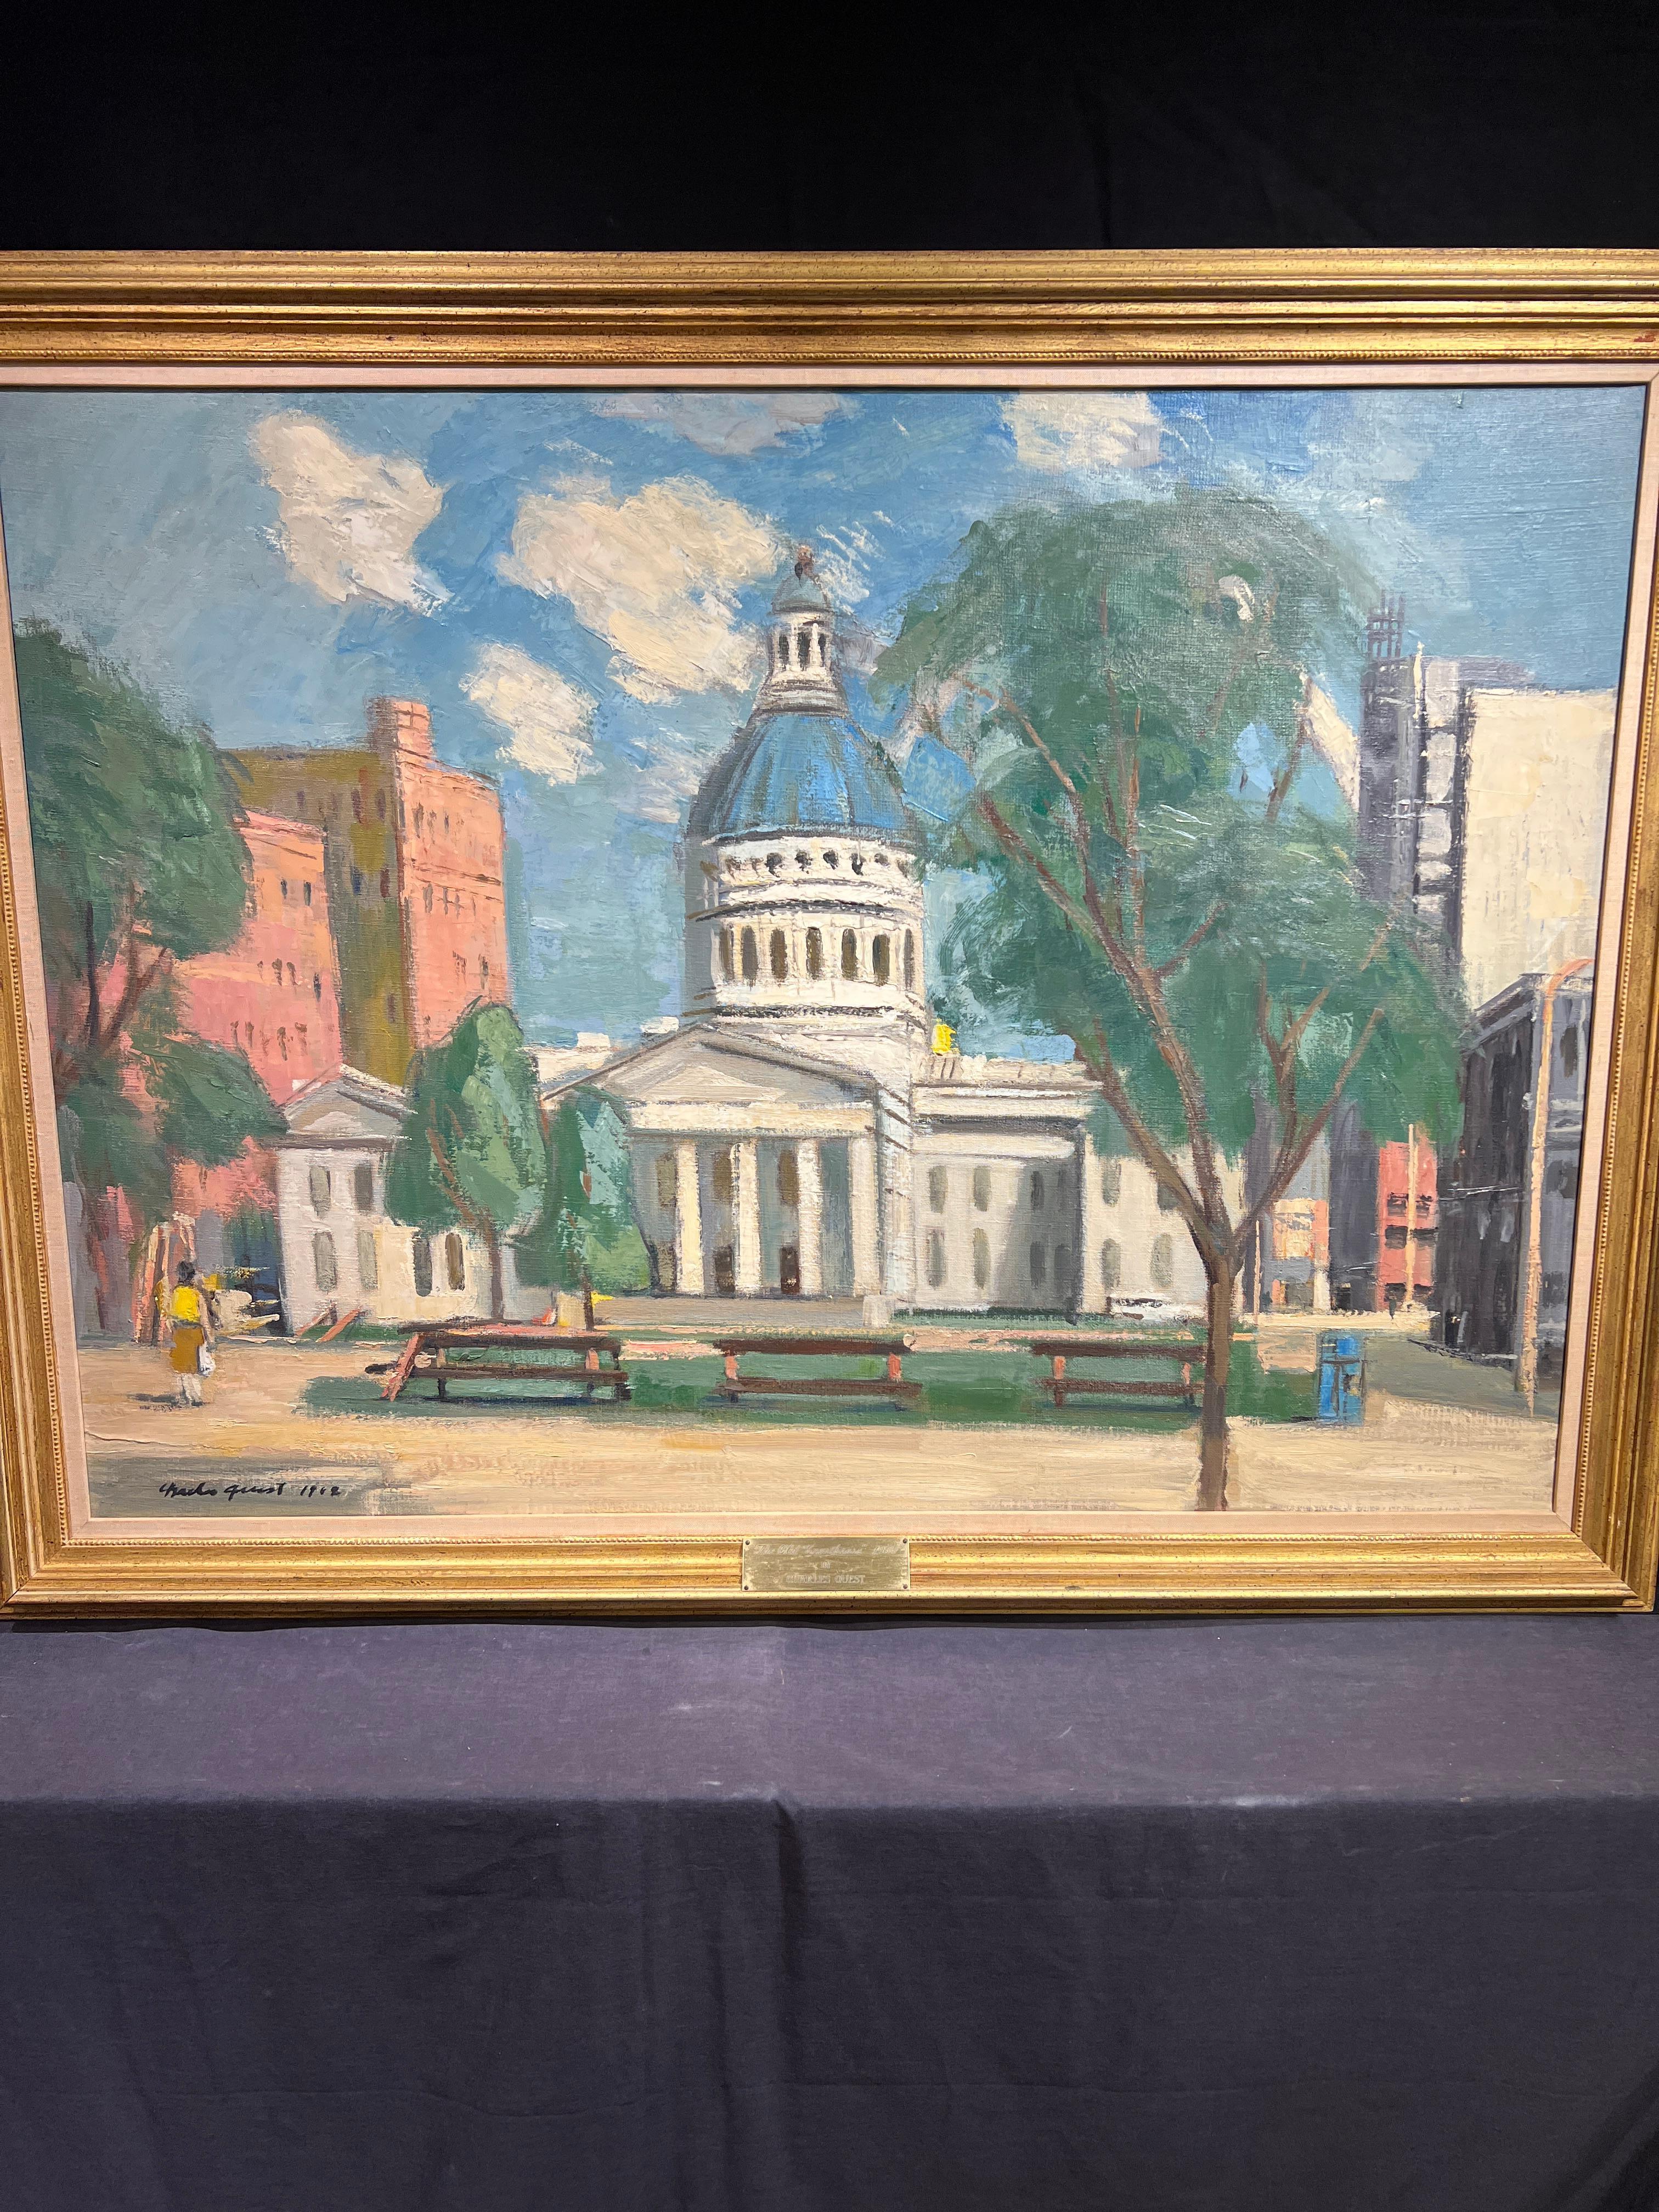 The Old Courthouse - American Impressionist Painting by Charles Quest